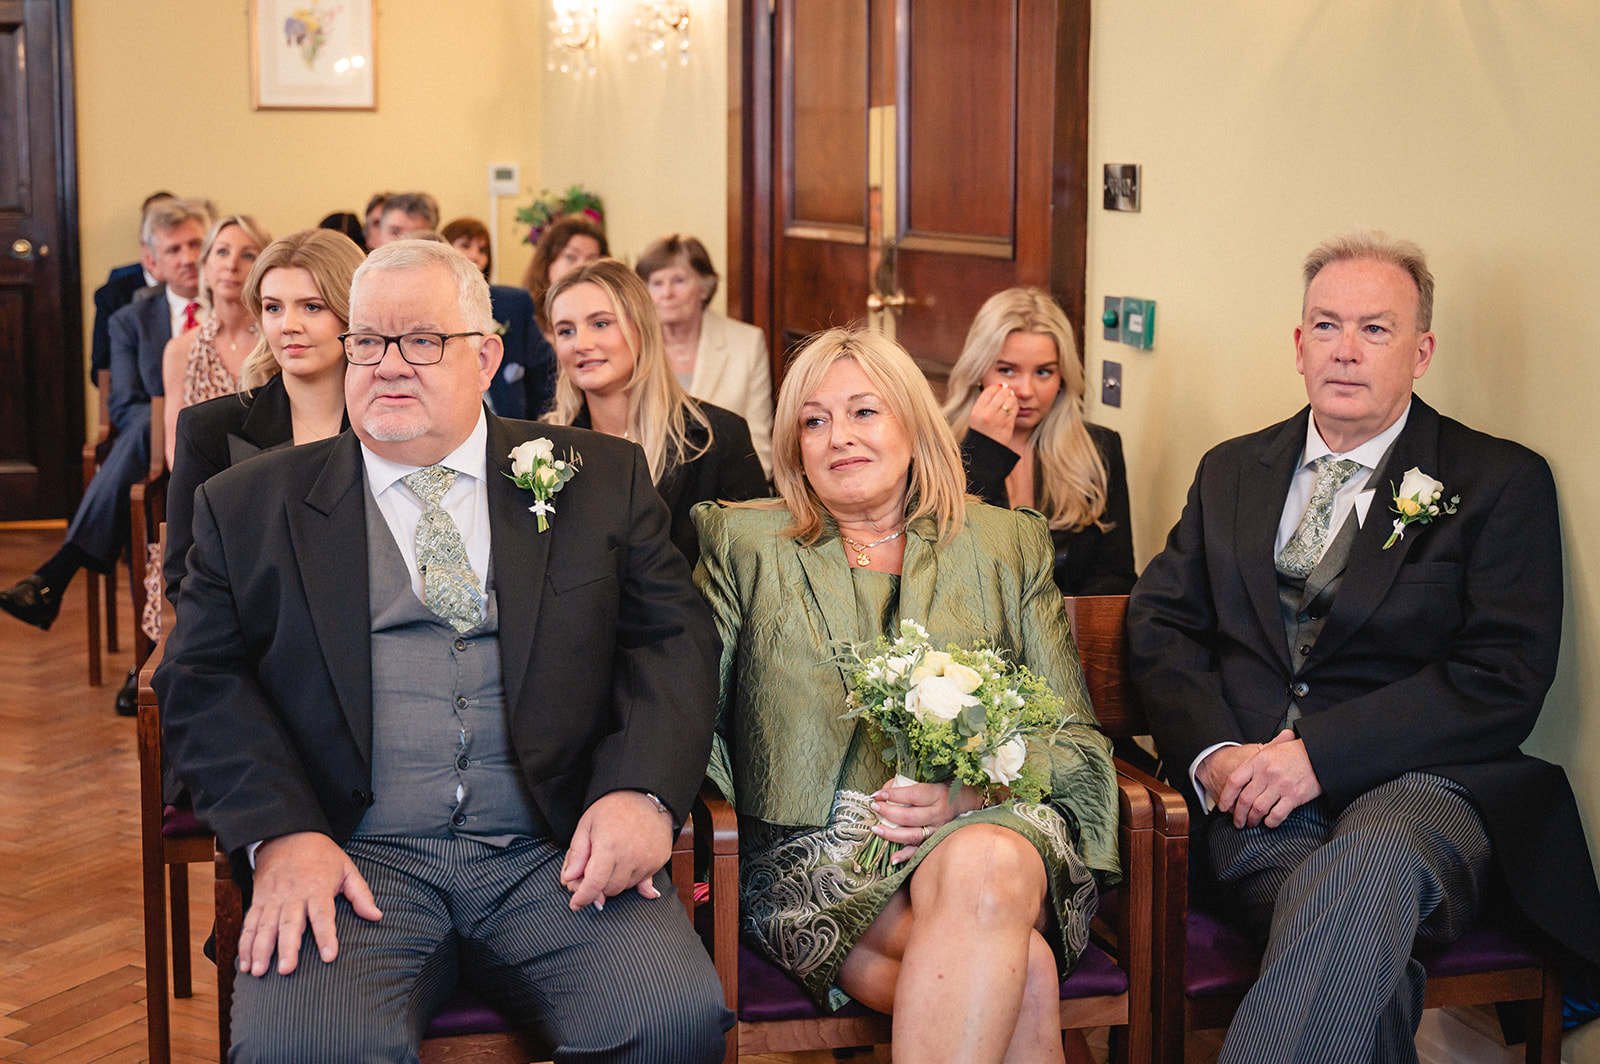 Guests during the wedding ceremony in the Brydon Room at Chelsea Town Hall